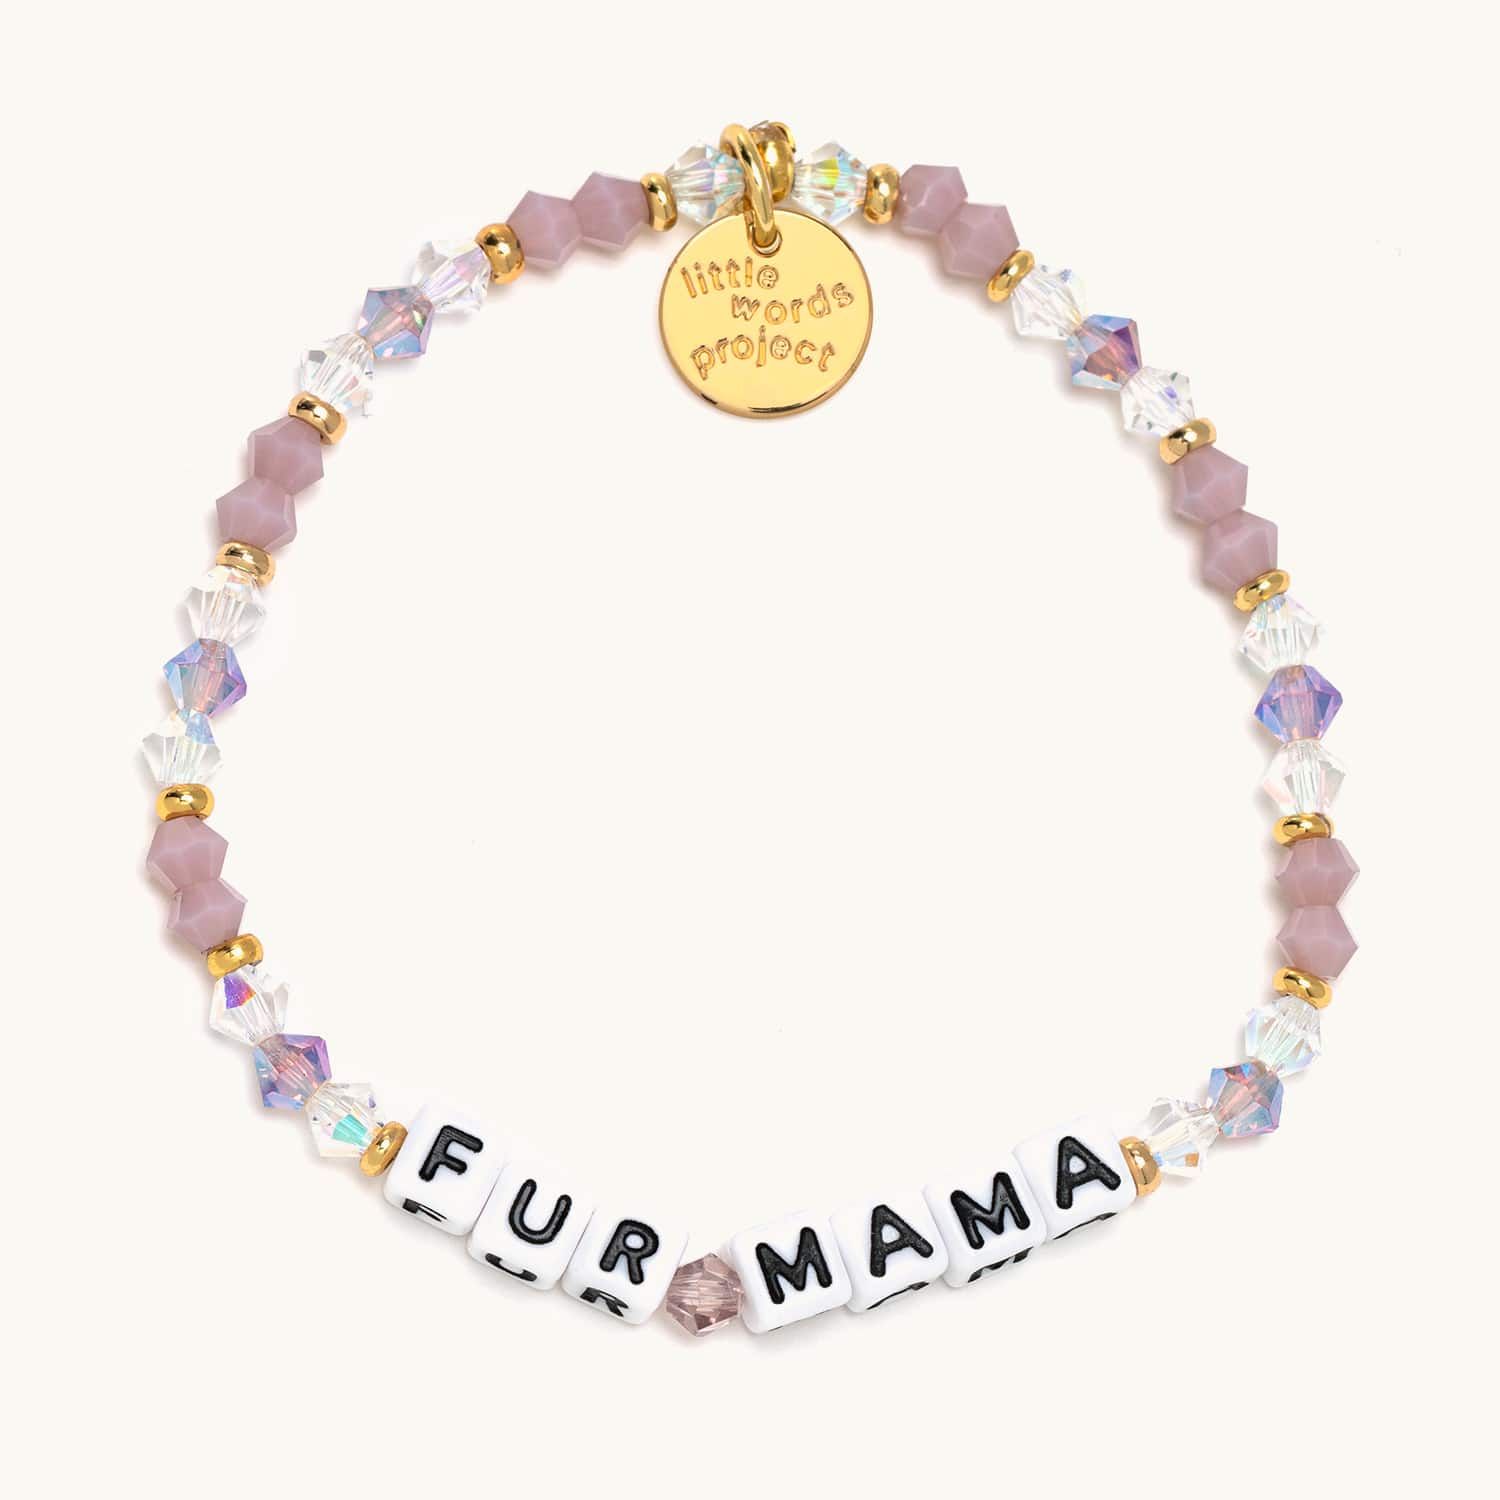 Fur Mama- Family | Little Words Project